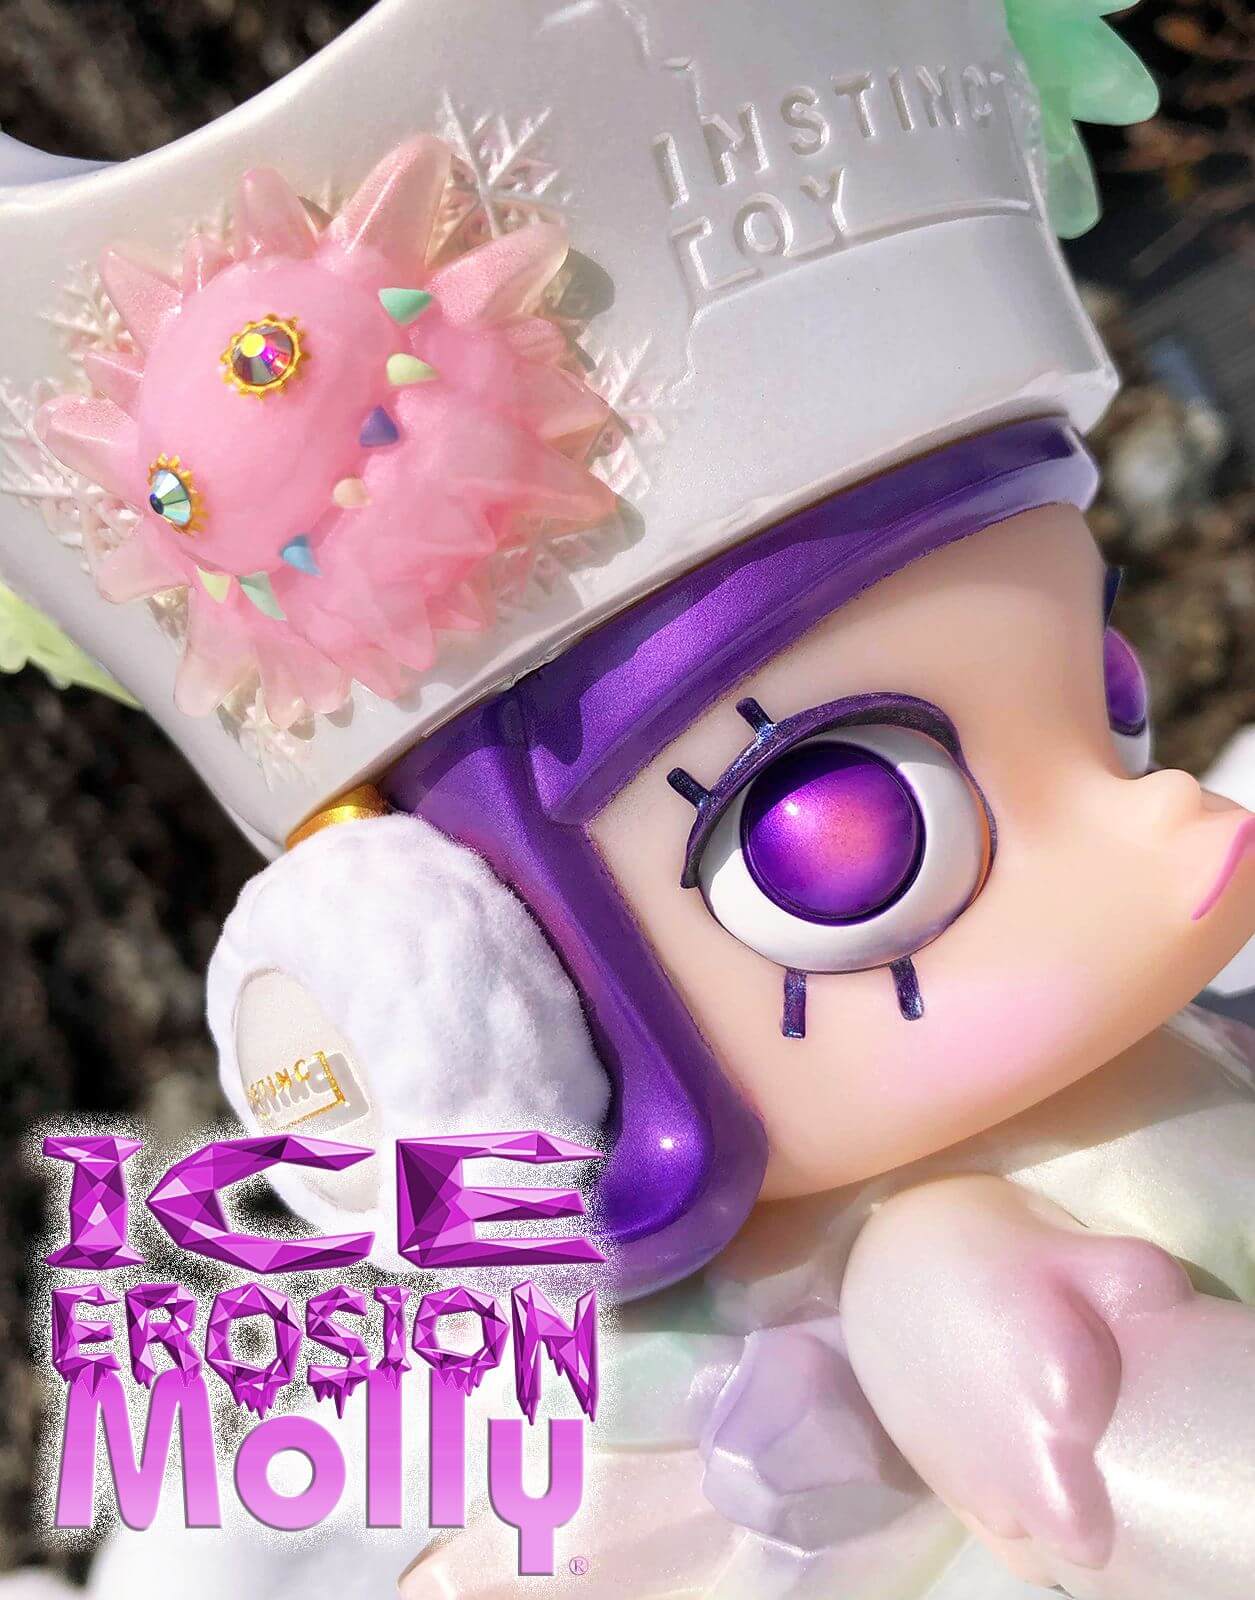 ICE EROSION MOLLY 2018 by KENNYSWORK x INSTINCTOY - The Toy Chronicle